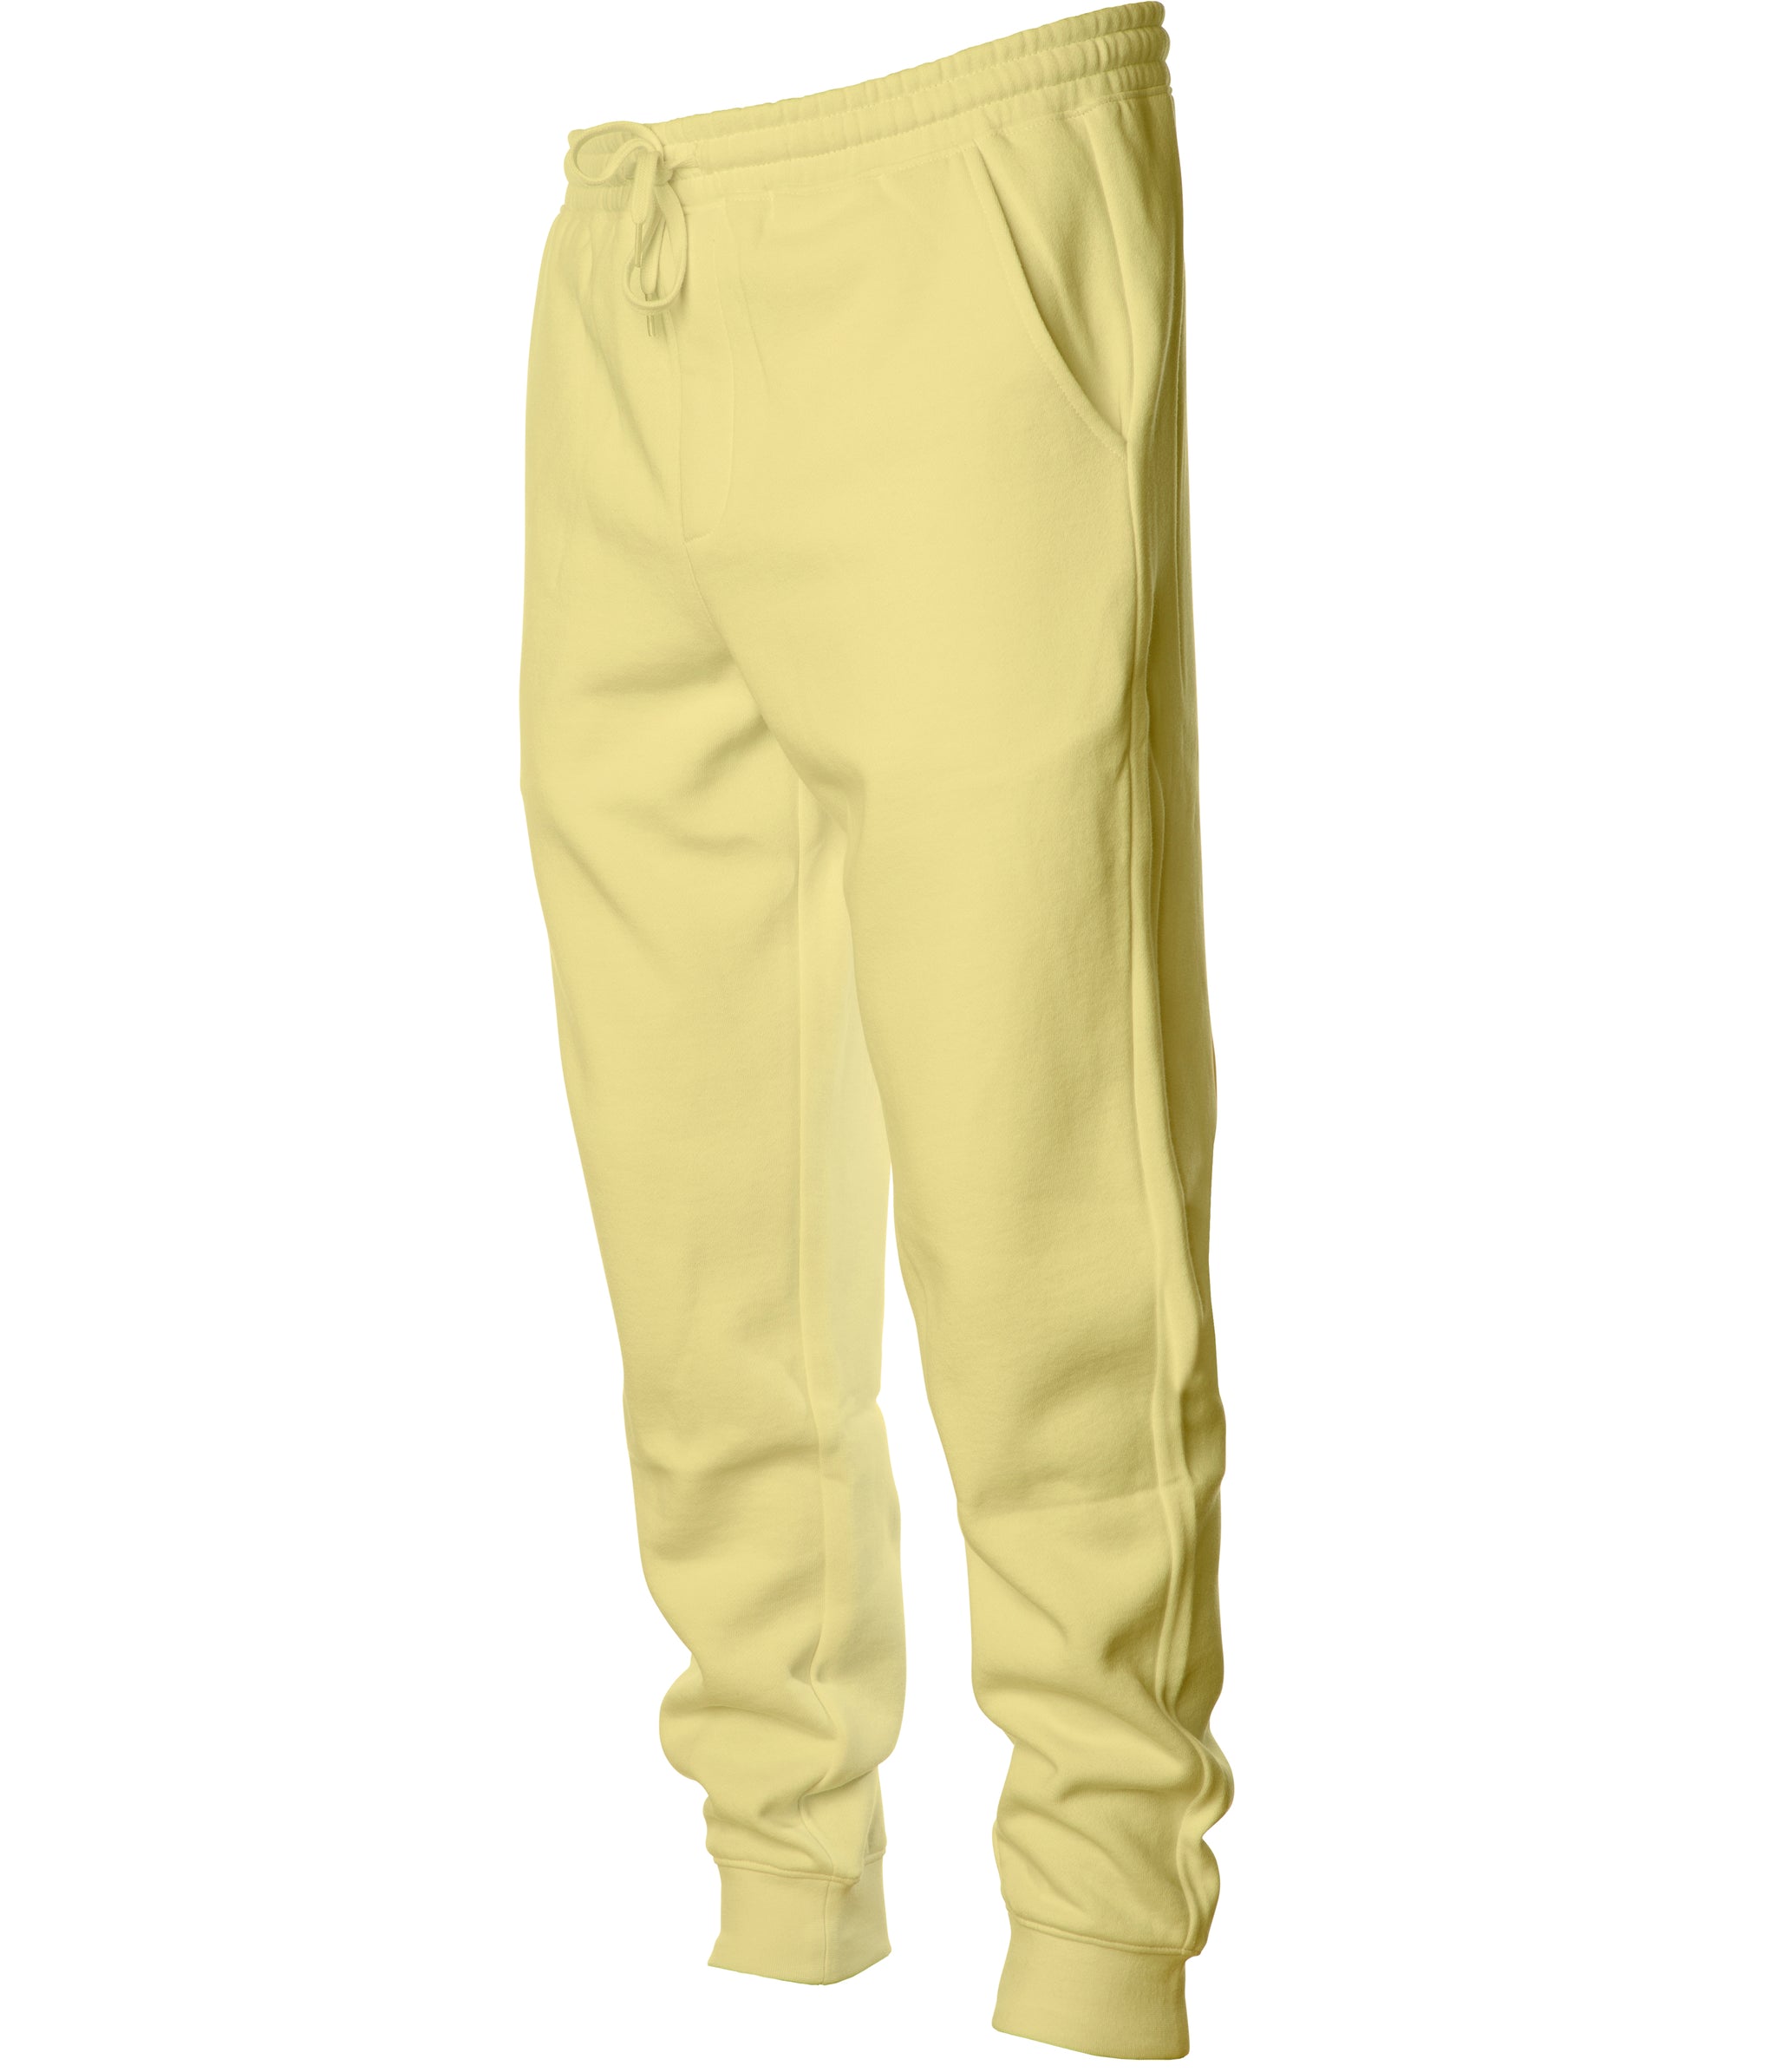 Buy Light Yellow Kota Culottes Online - Shop for W